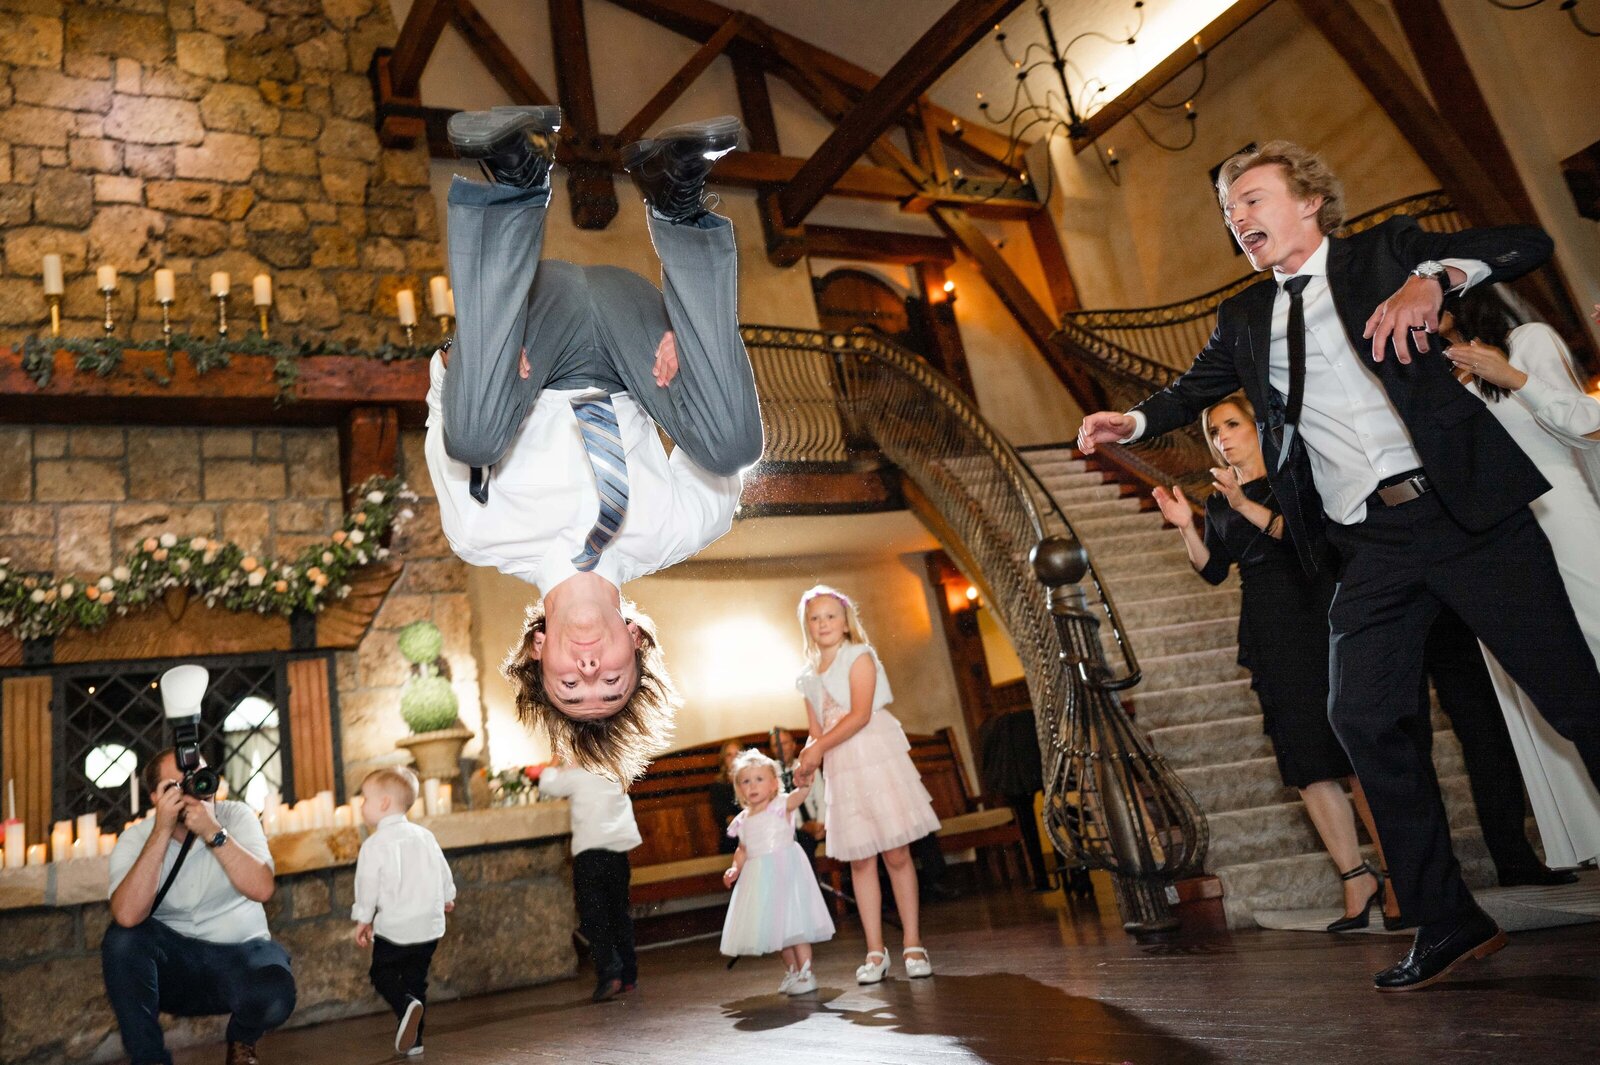 Dancing at wedding reception as guest does a backflip.